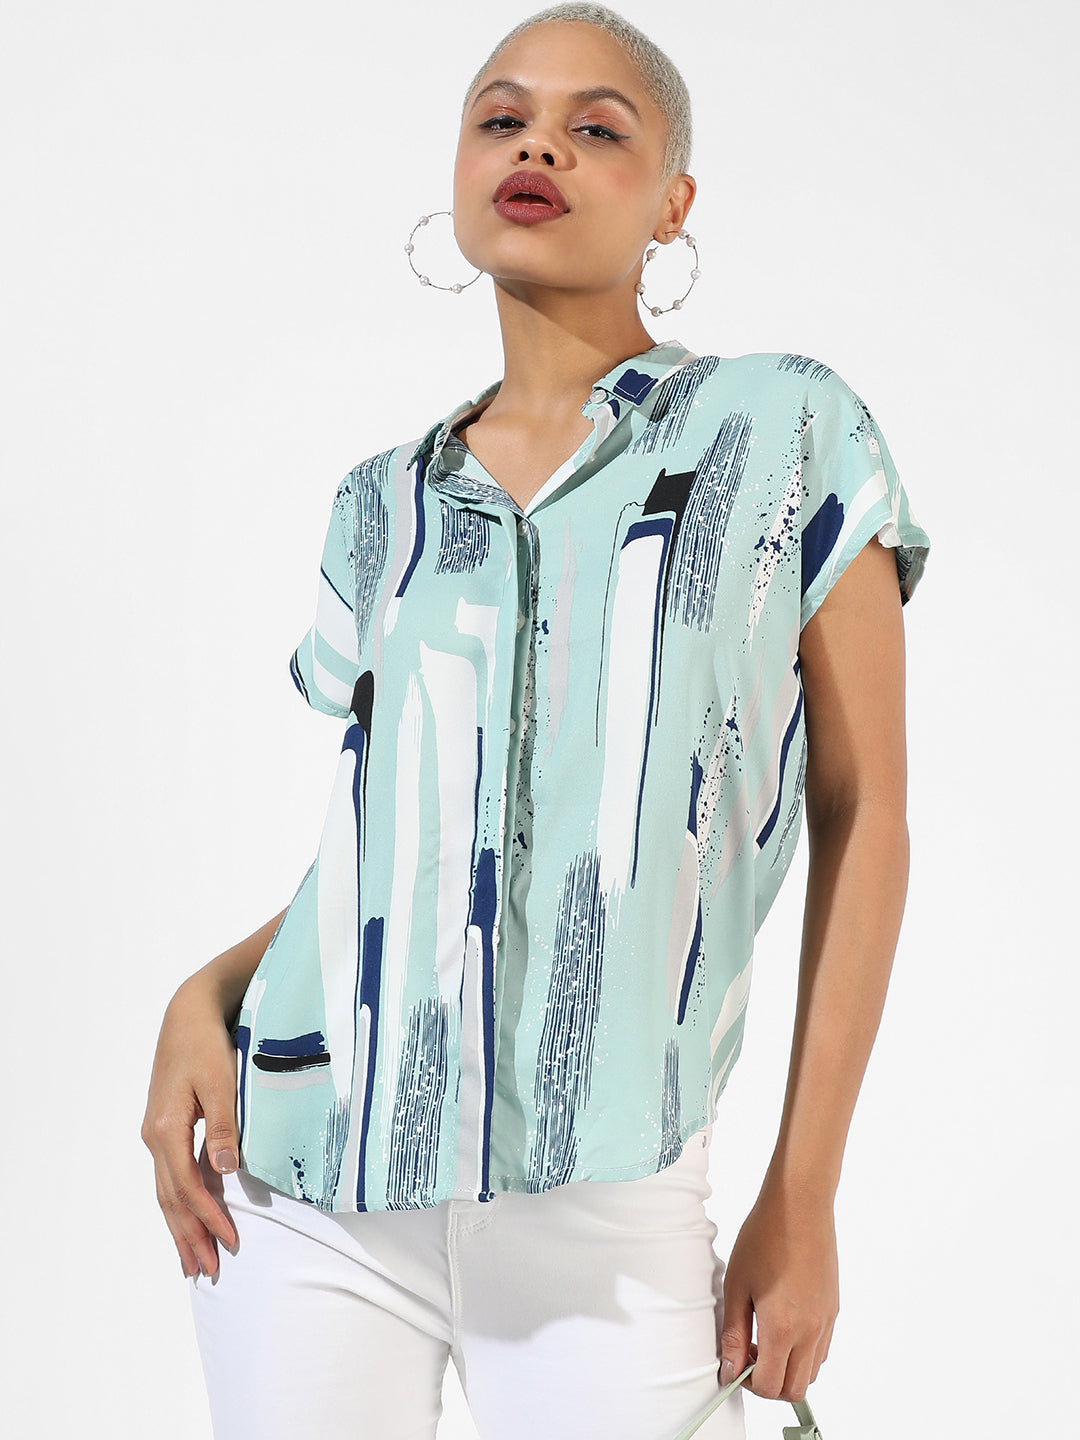 Abstract Top